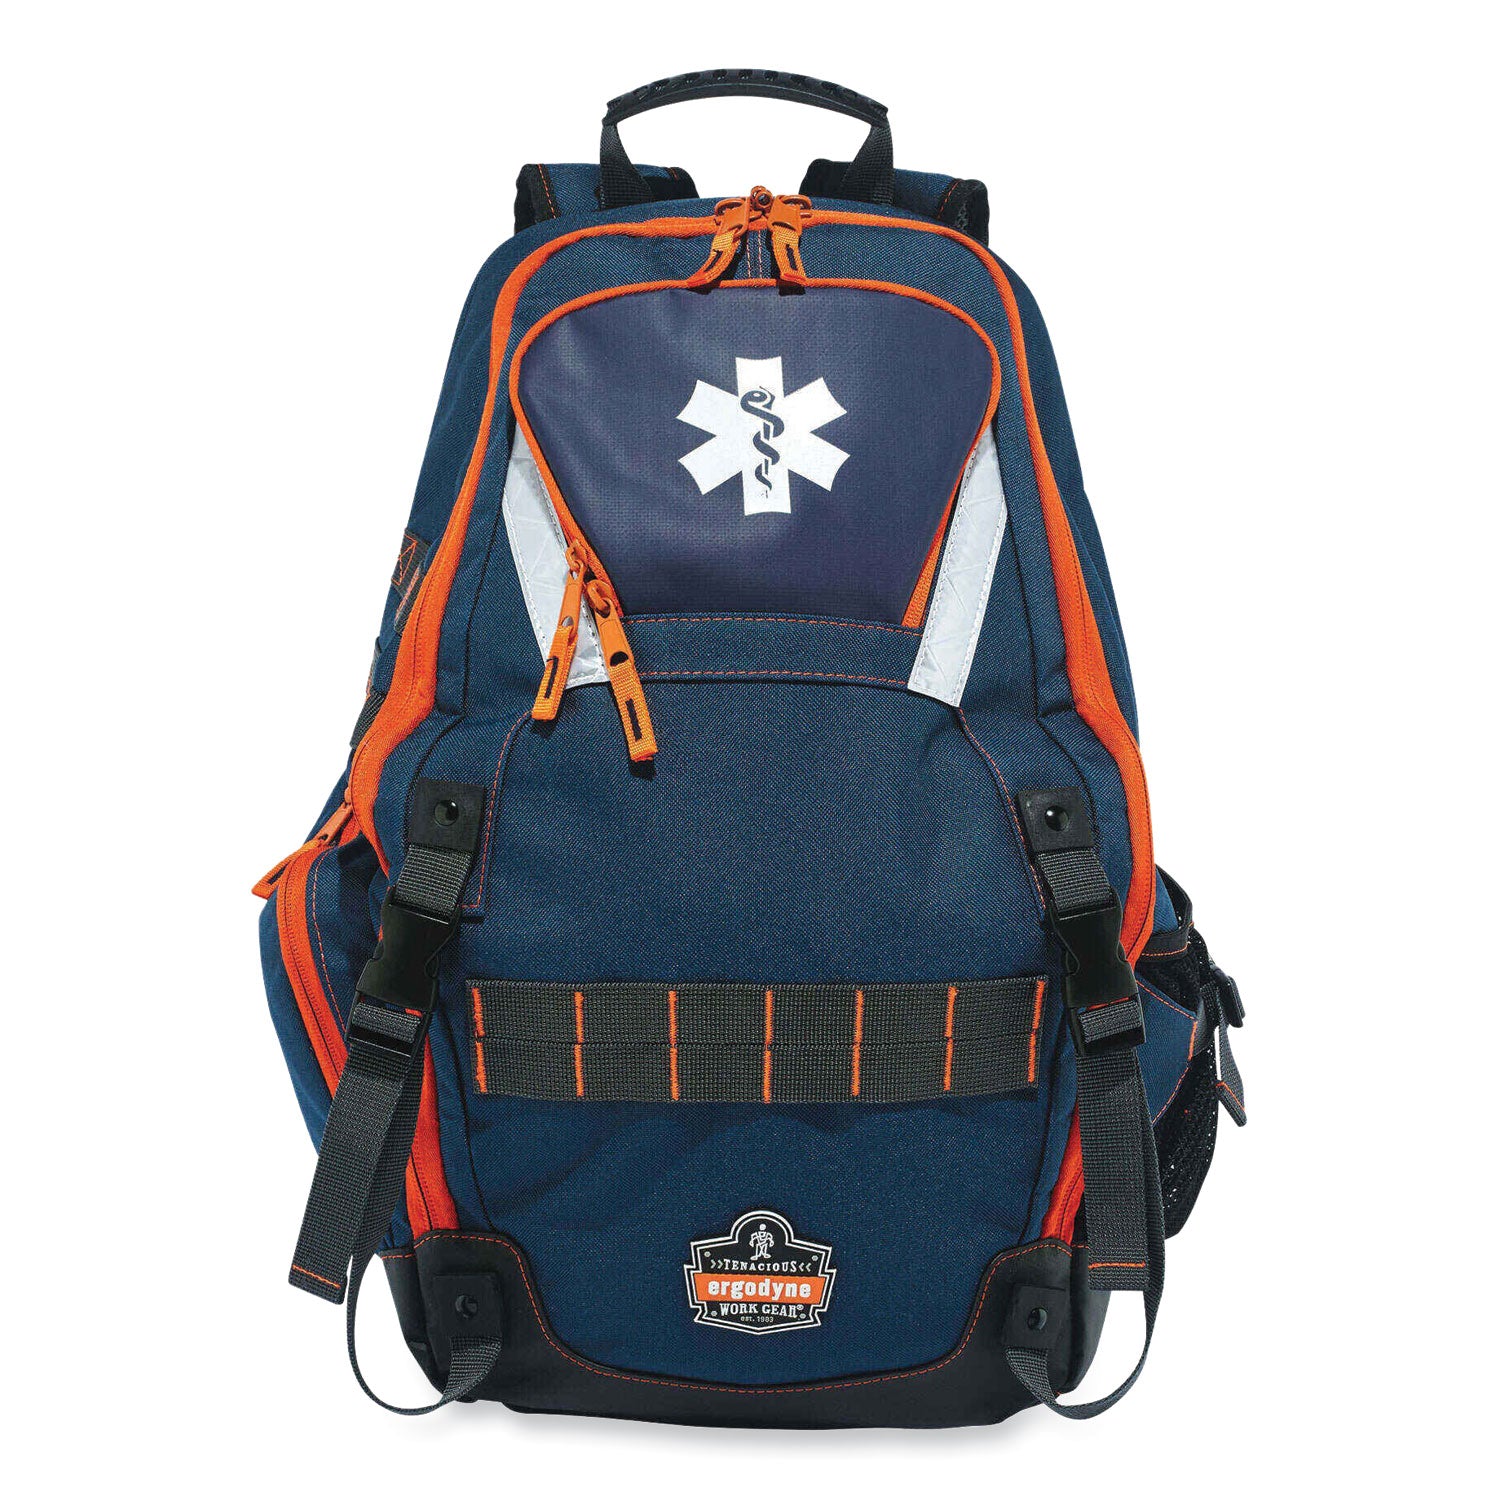 arsenal-5244-responder-backpack-8-x-145-x-20-blue-ships-in-1-3-business-days_ego13497 - 1